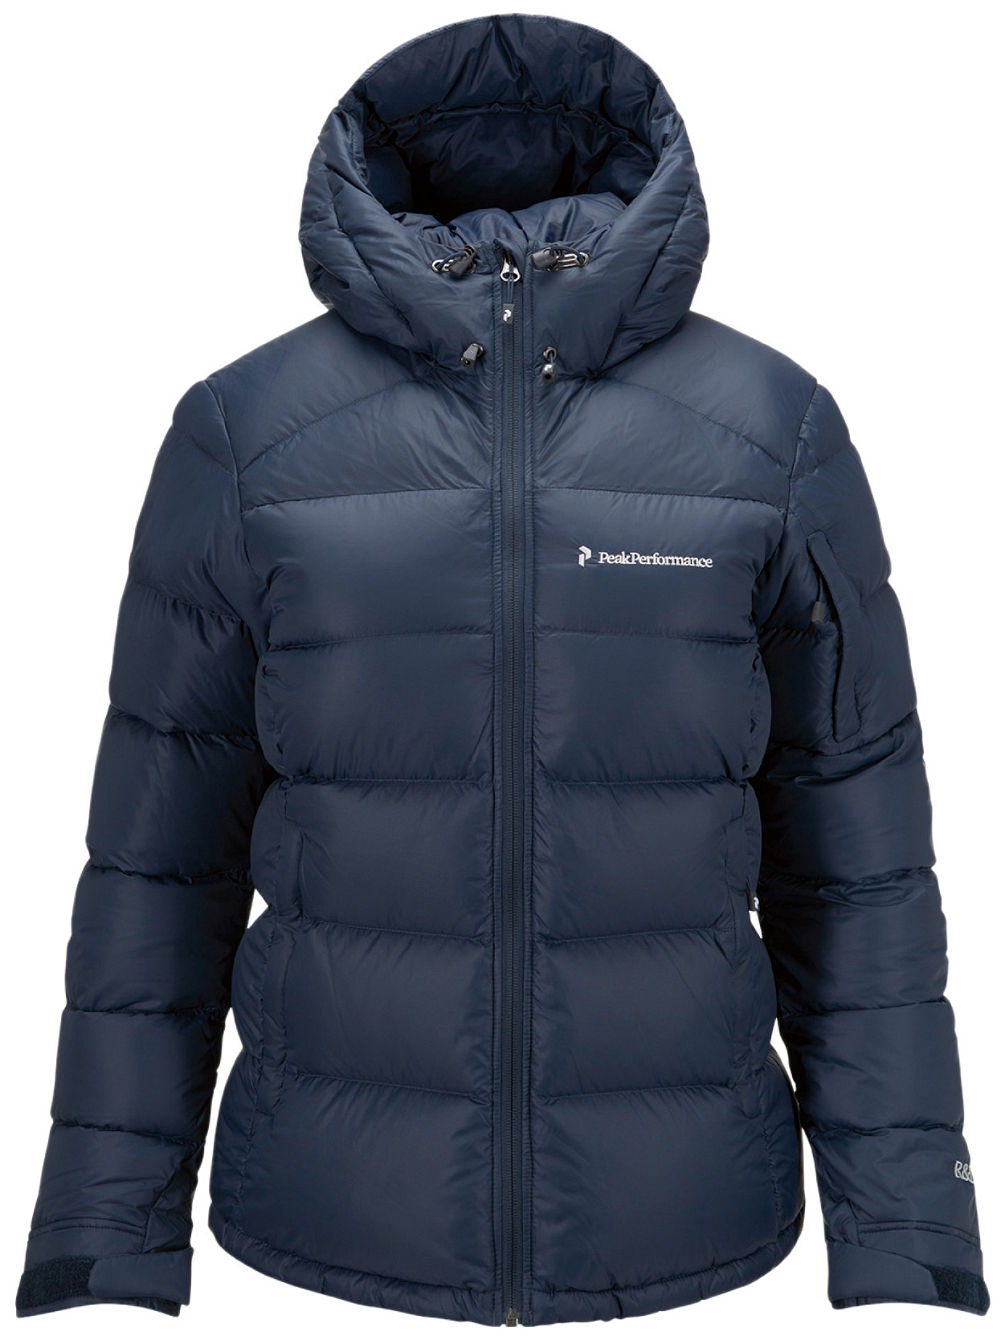 Buy Peak Performance Frost Down Jacket online at blue-tomato.com